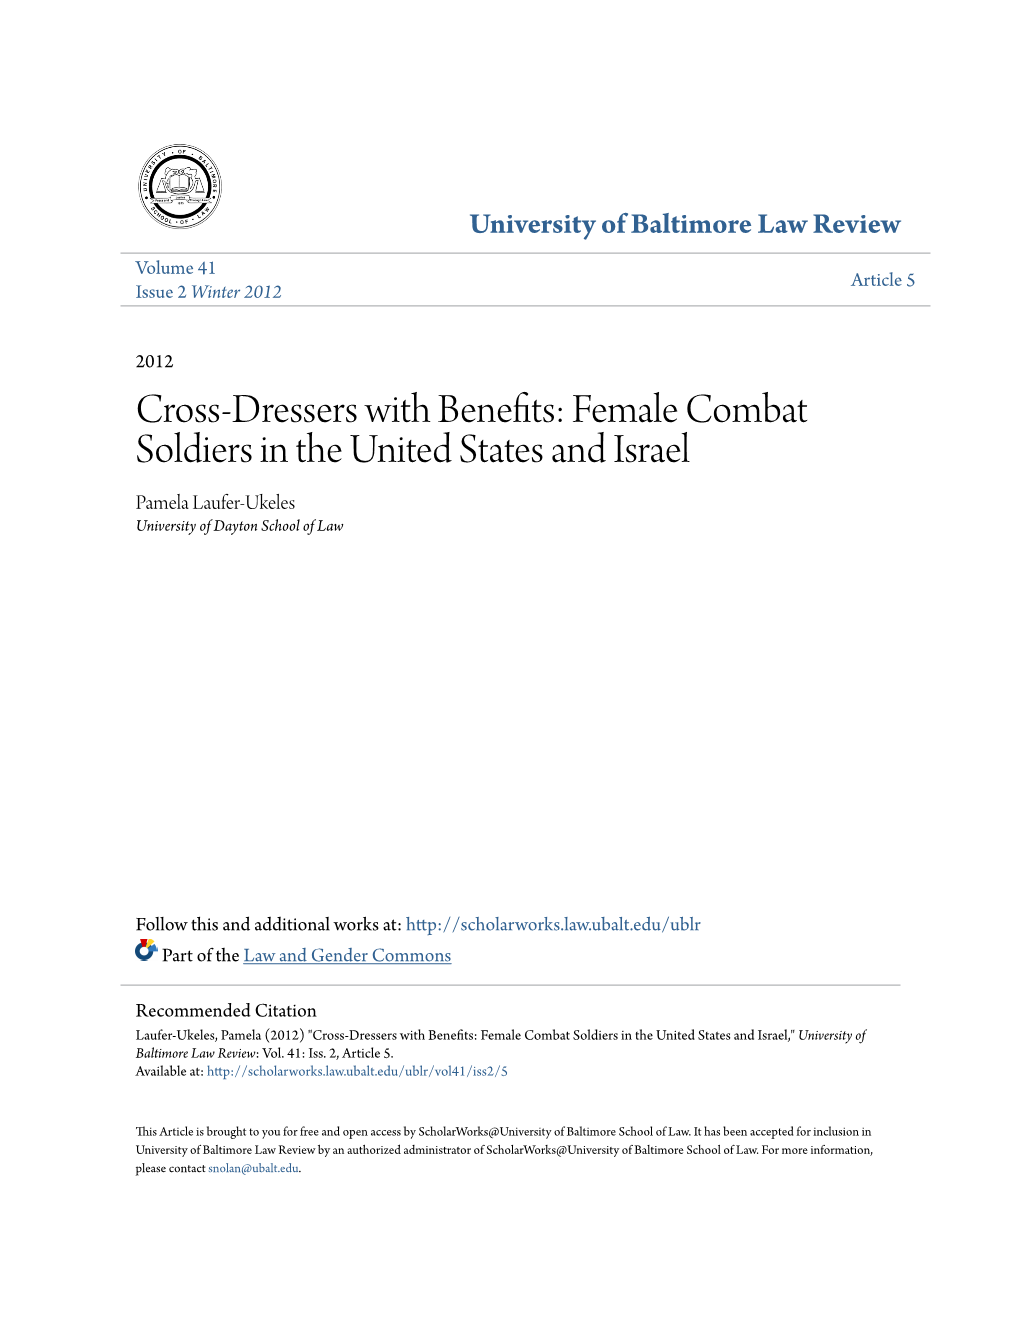 Female Combat Soldiers in the United States and Israel Pamela Laufer-Ukeles University of Dayton School of Law